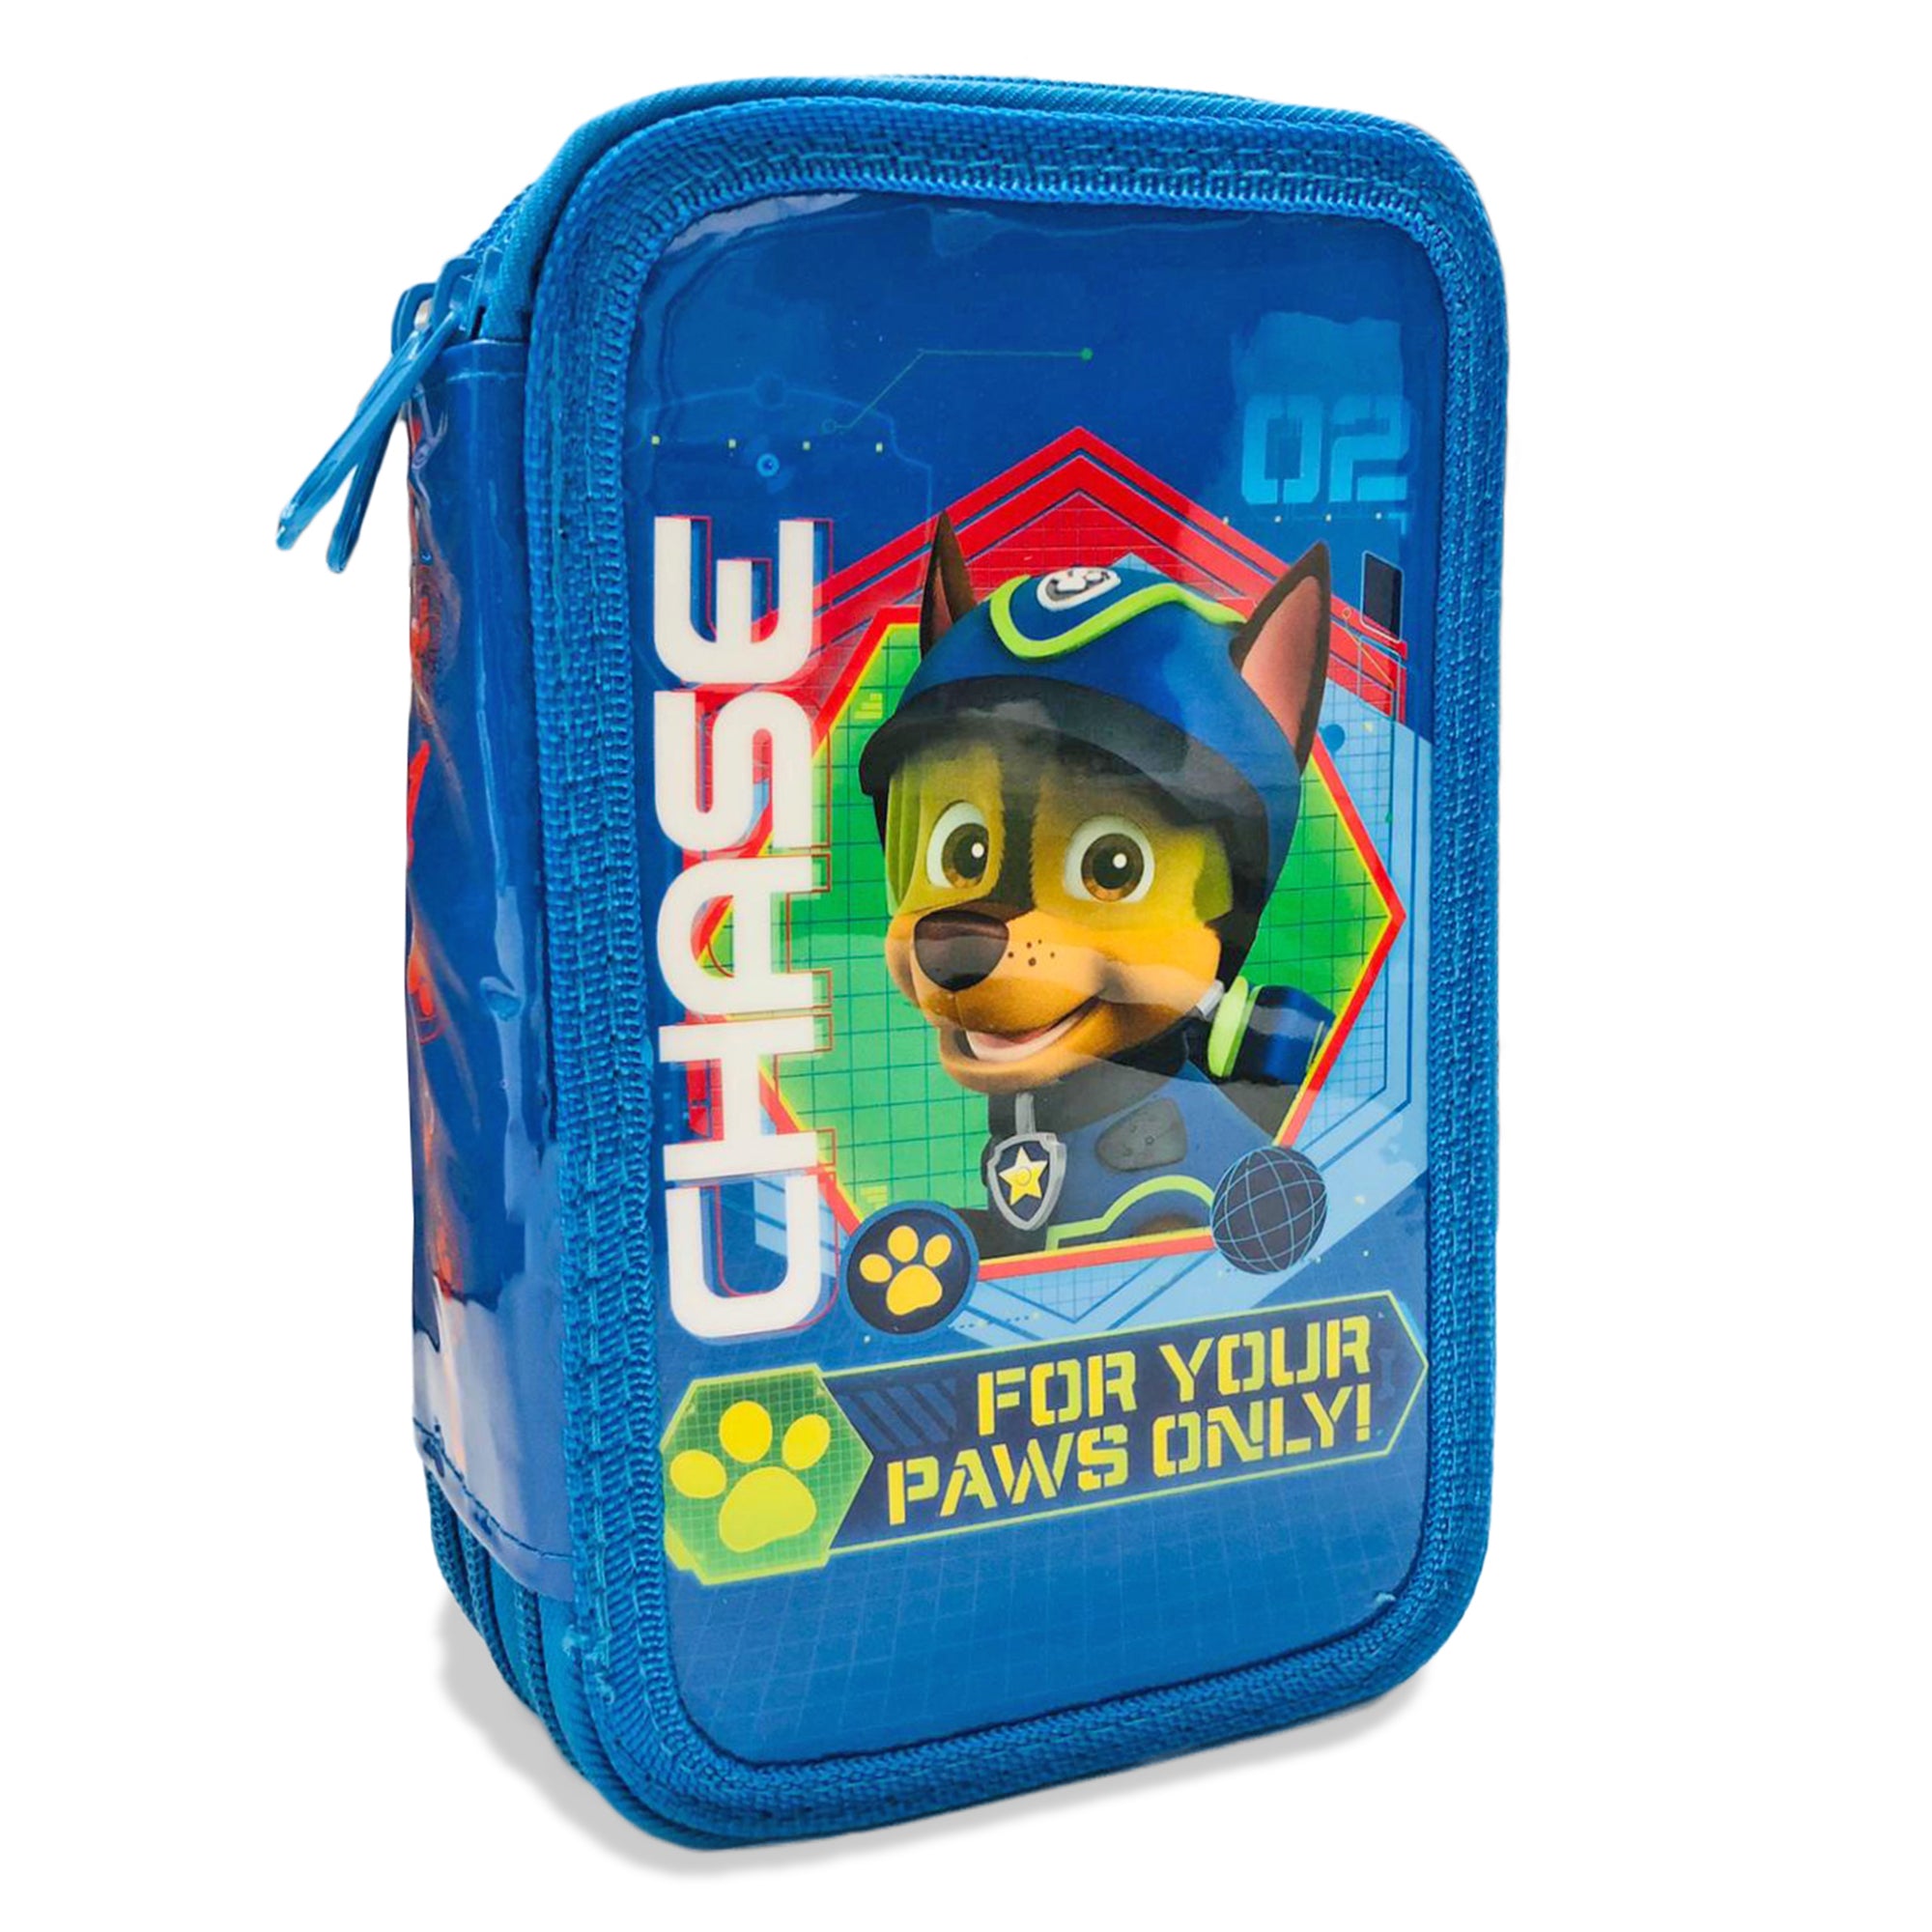 Made in Trade Plumier 3 compartimentstd. Paw Patrol Clamshell, Sintetico, Nero, 28 x 10 x 16 cm